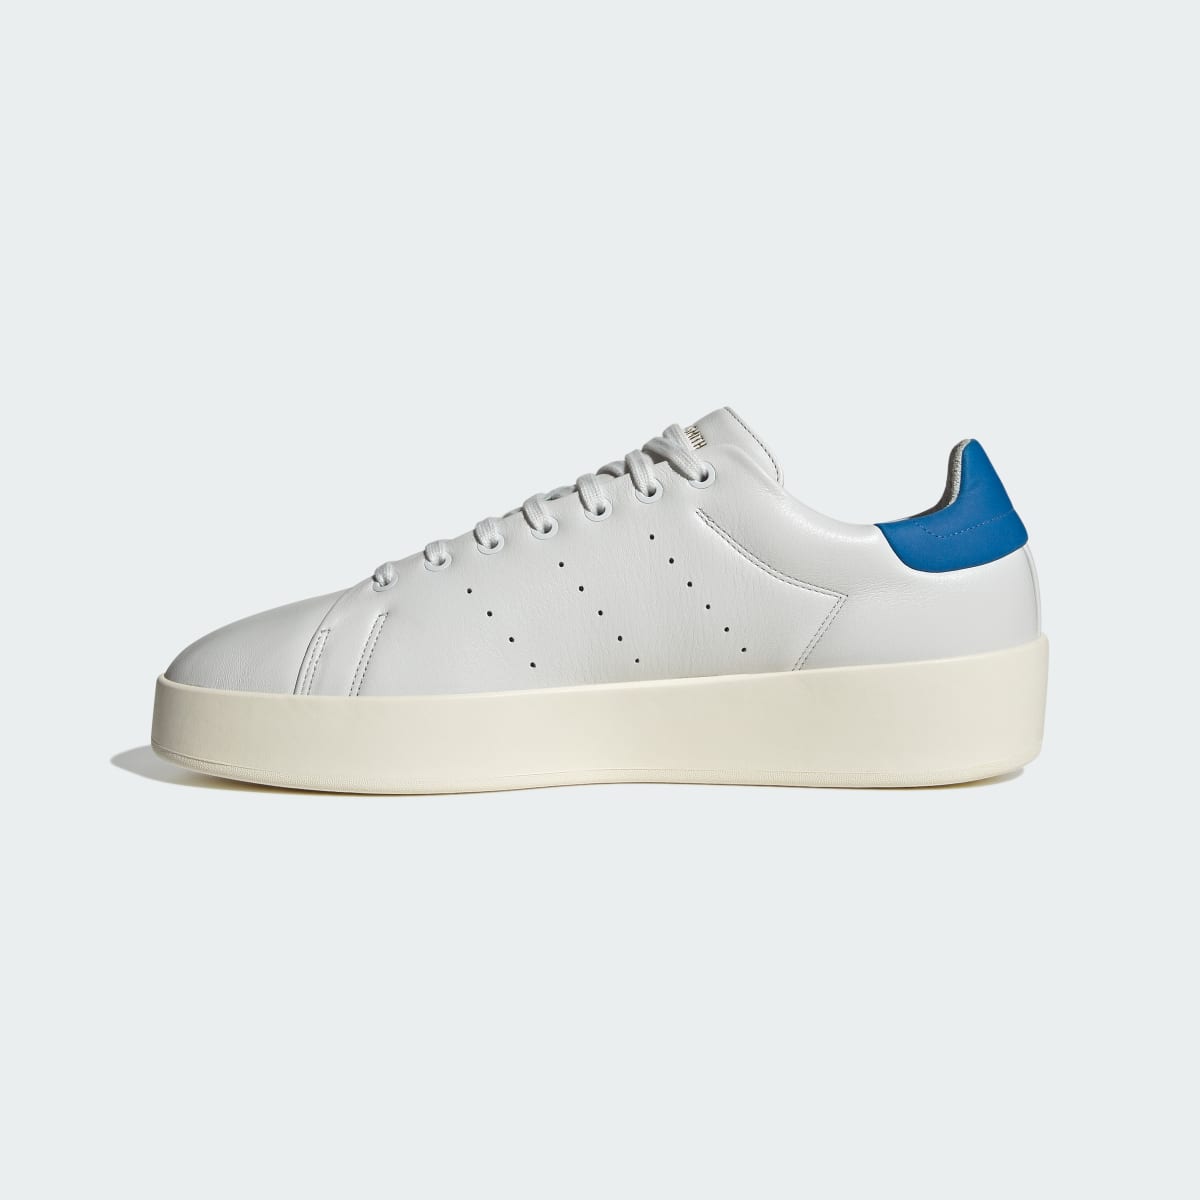 Adidas Chaussure Stan Smith Recon. 7